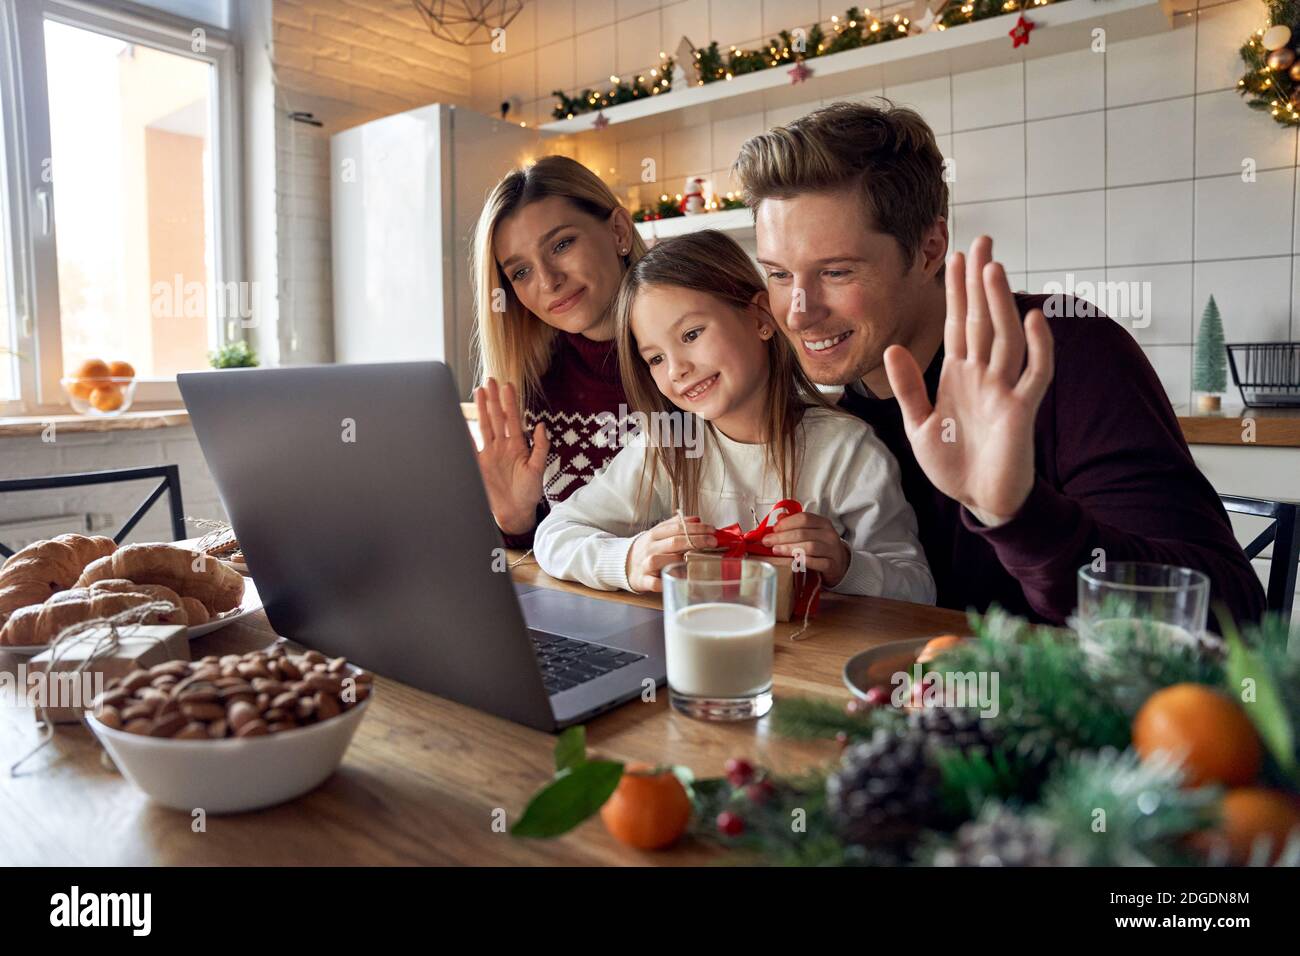 Happy family with kid daughter using laptop having virtual party on video call. Stock Photo